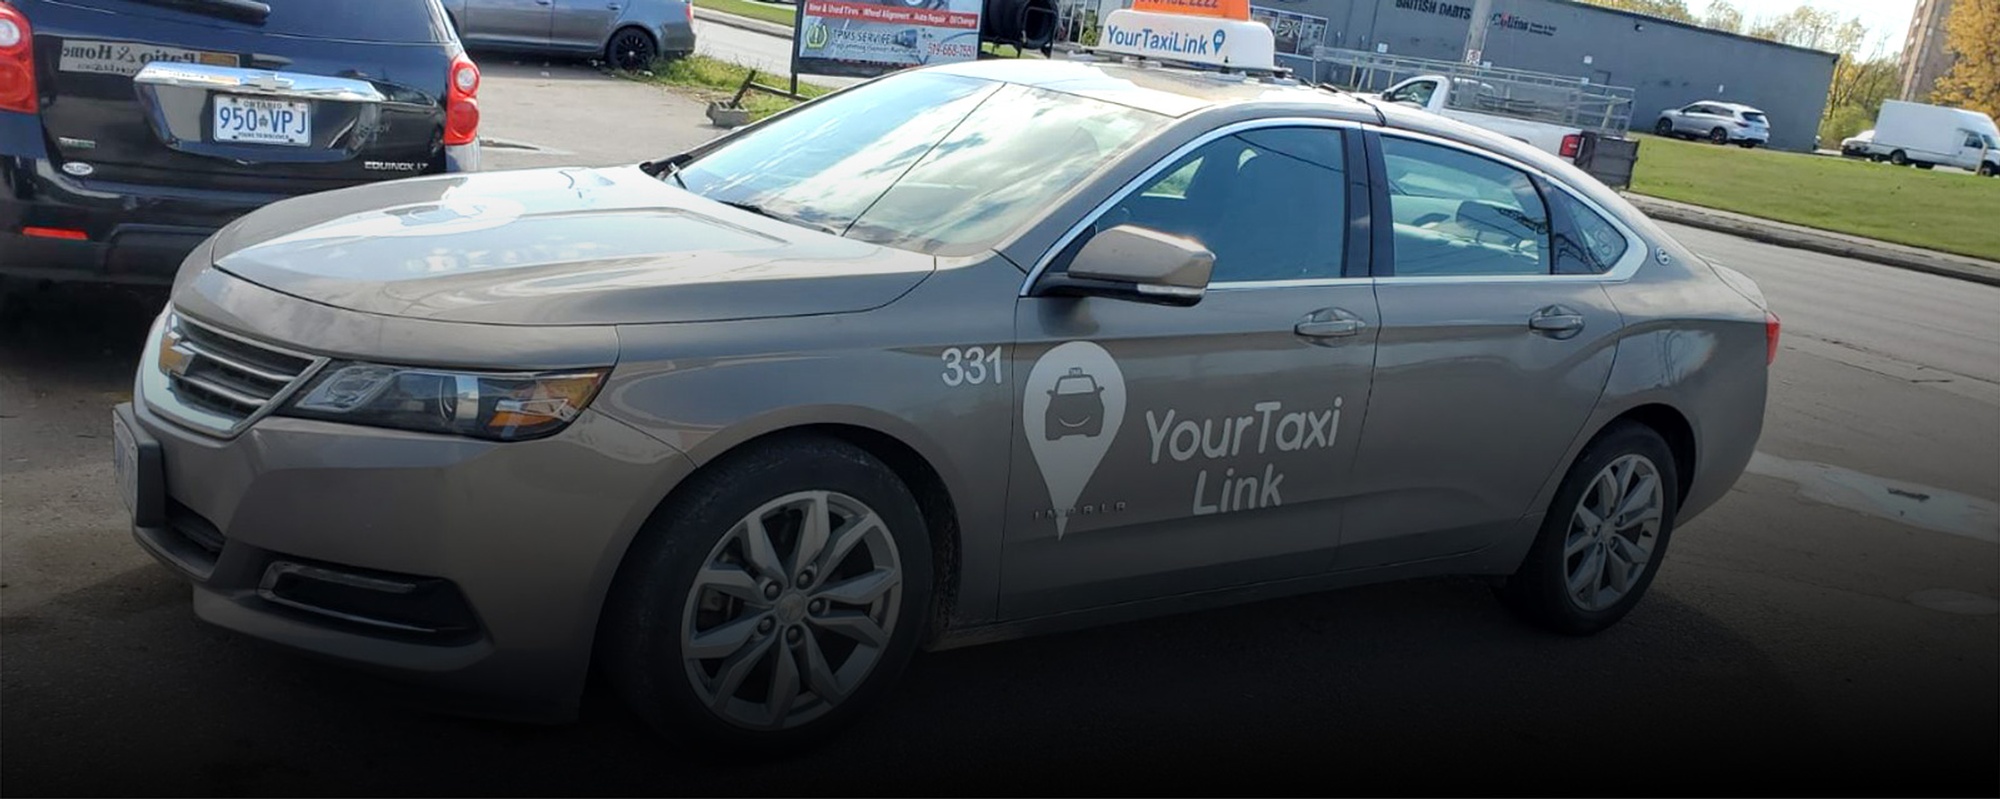 Blog by Your Taxi Link